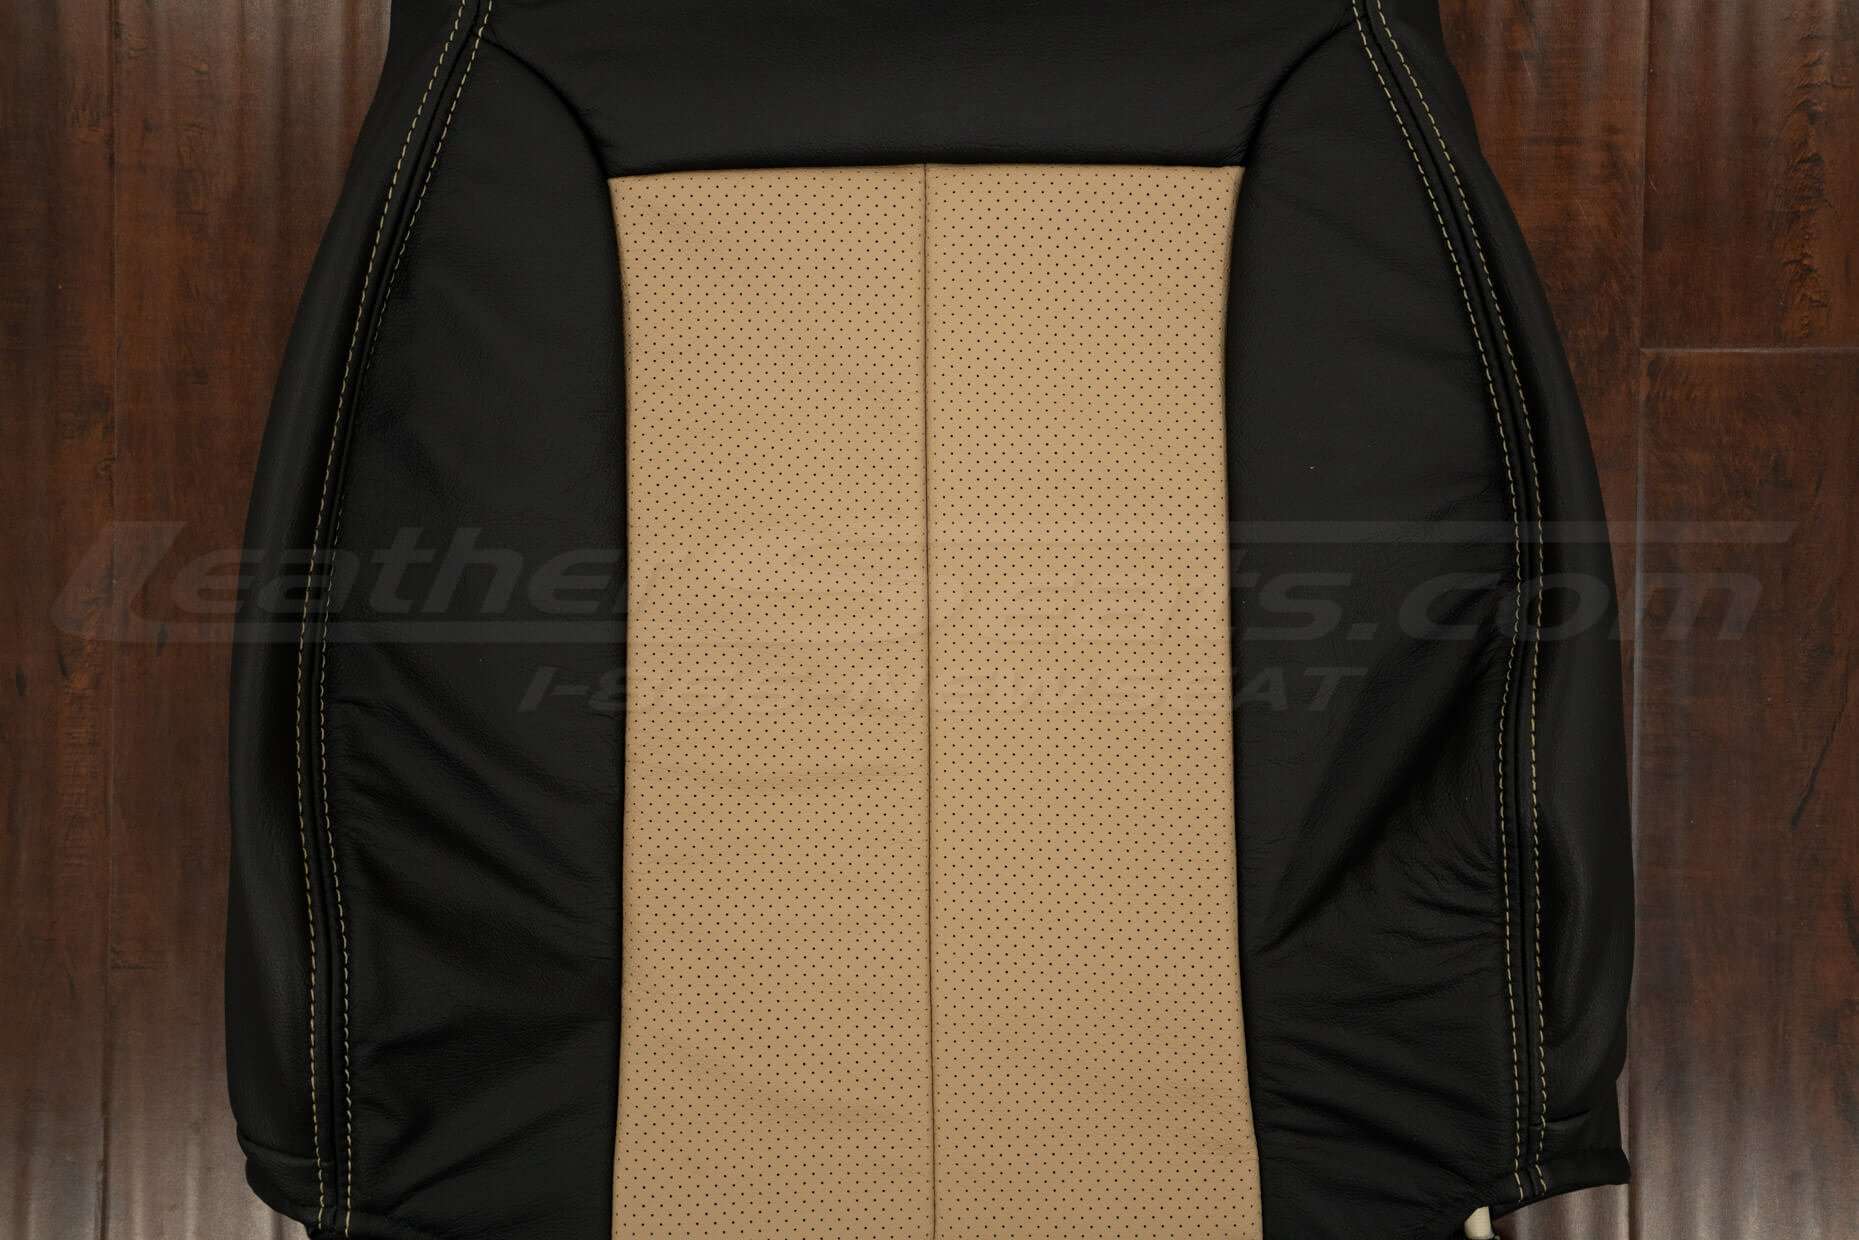 Bisque Perforated Combo section of backrest